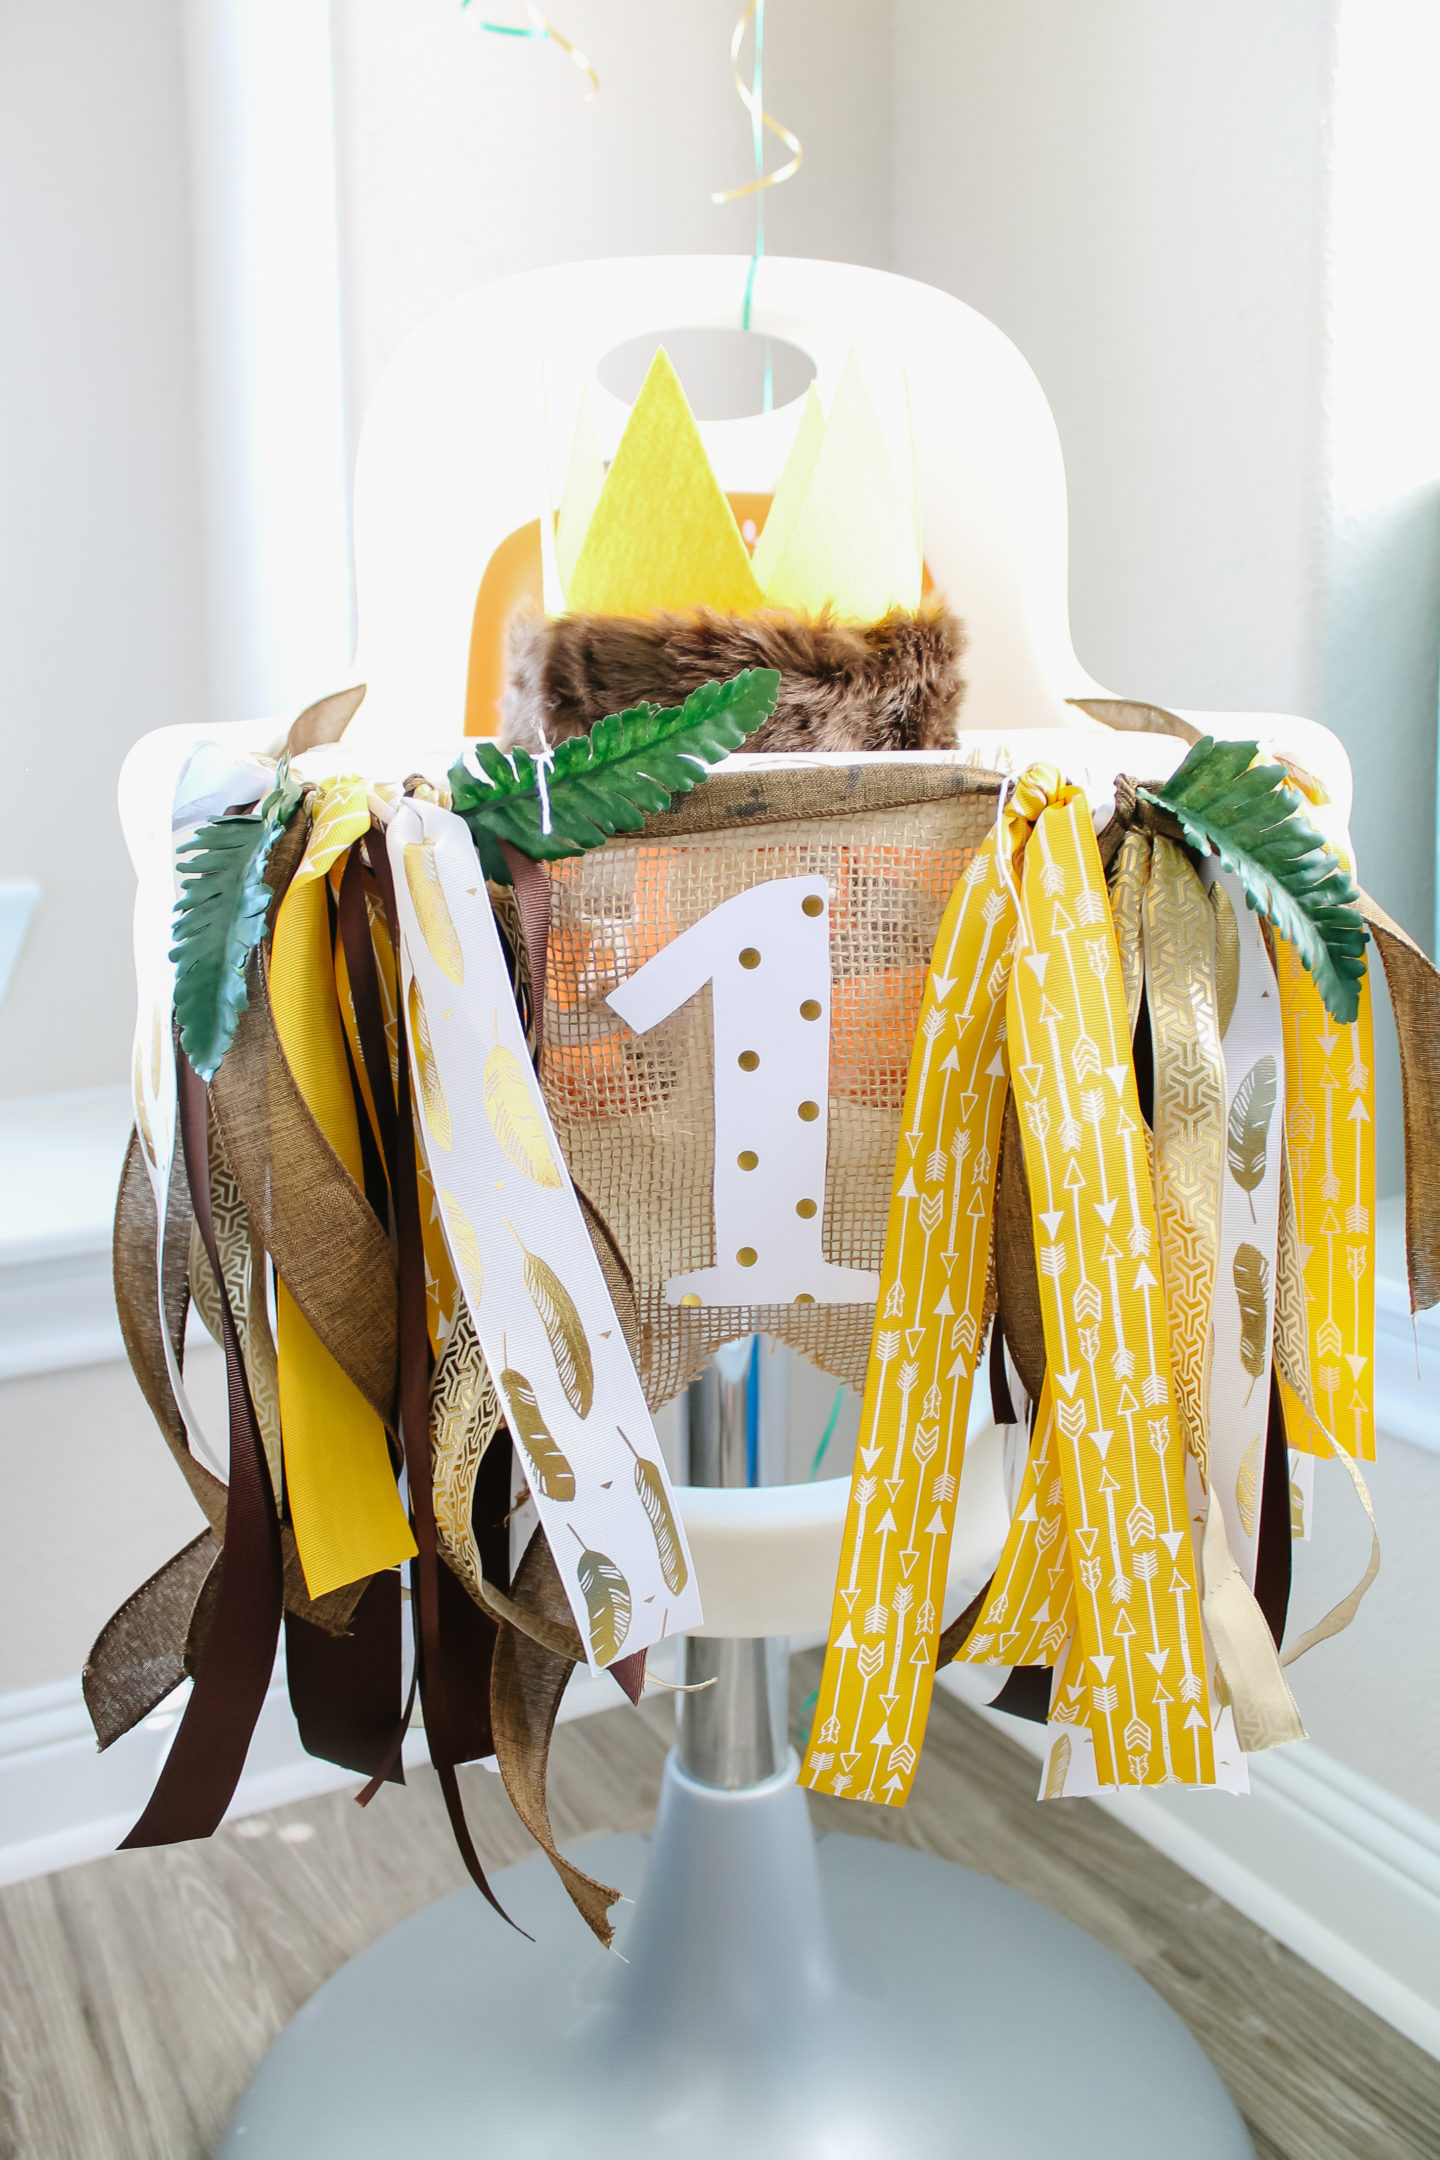 The cutest WILD ONE birthday party inspired by Where the Wild Things Are! Easy DIYs to recreate a simple and fun first birthday party! The crown is my favorite! #diy #party #wildone #firstbirthday